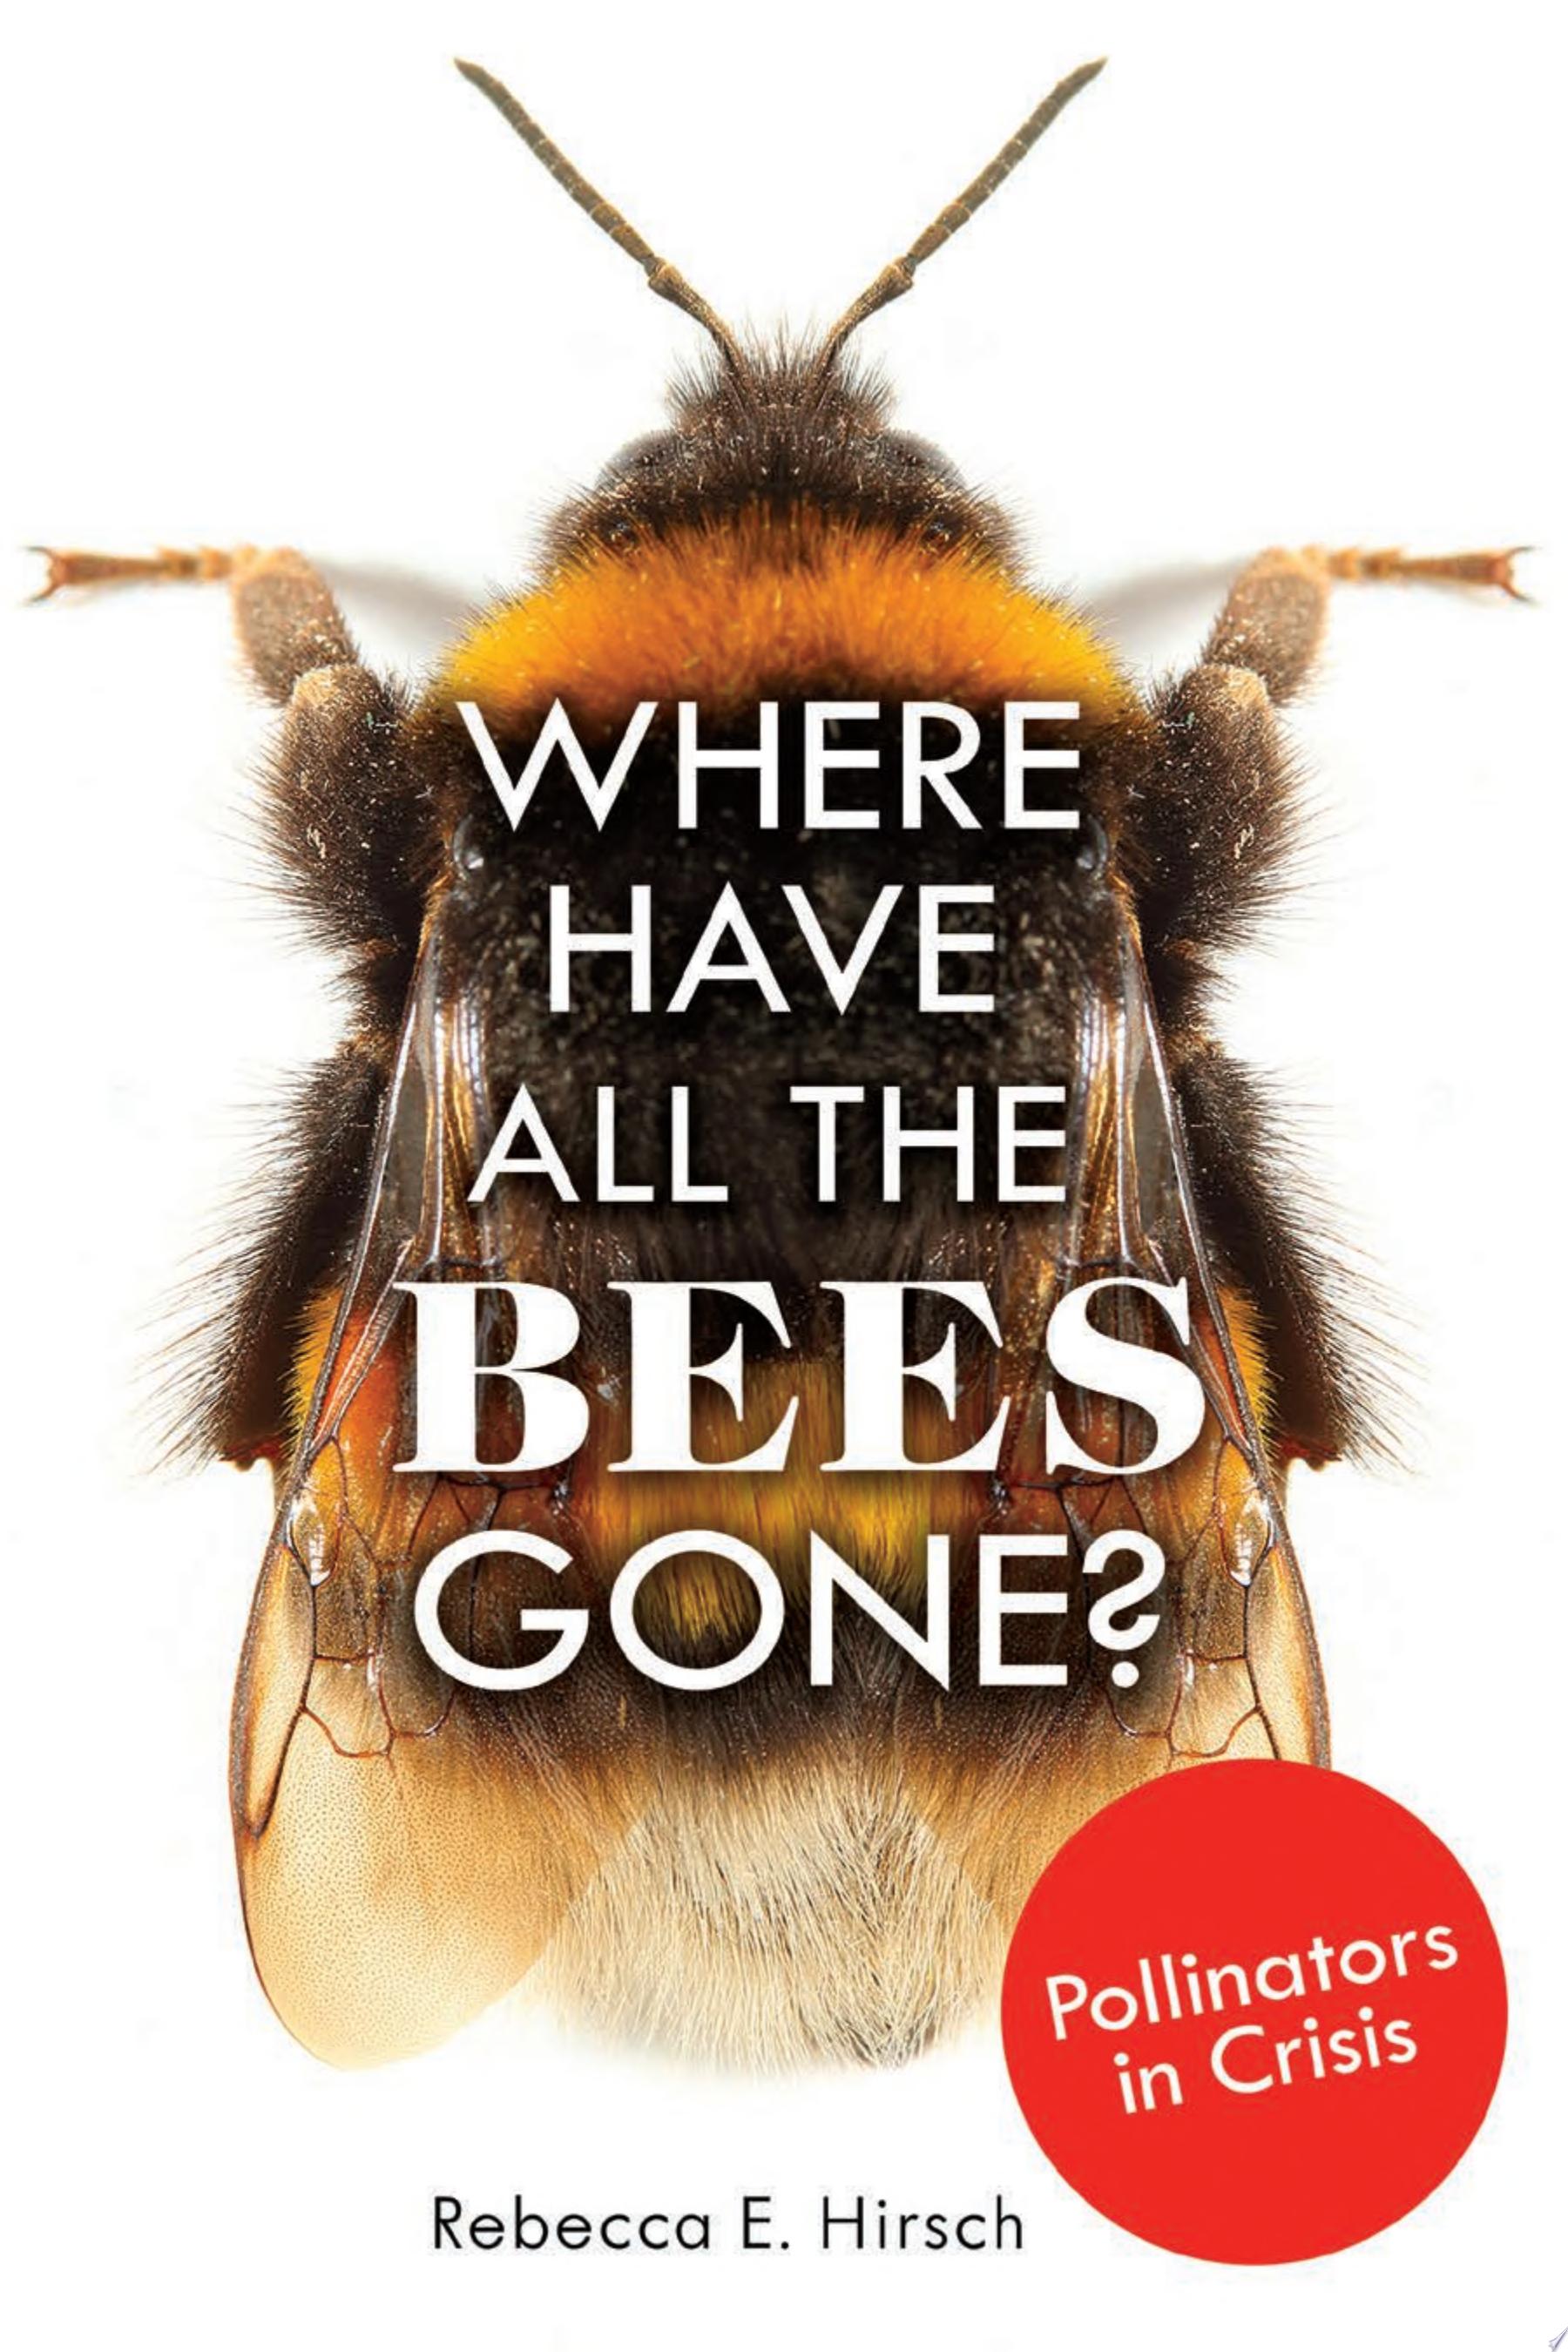 Image for "Where Have All the Bees Gone?"